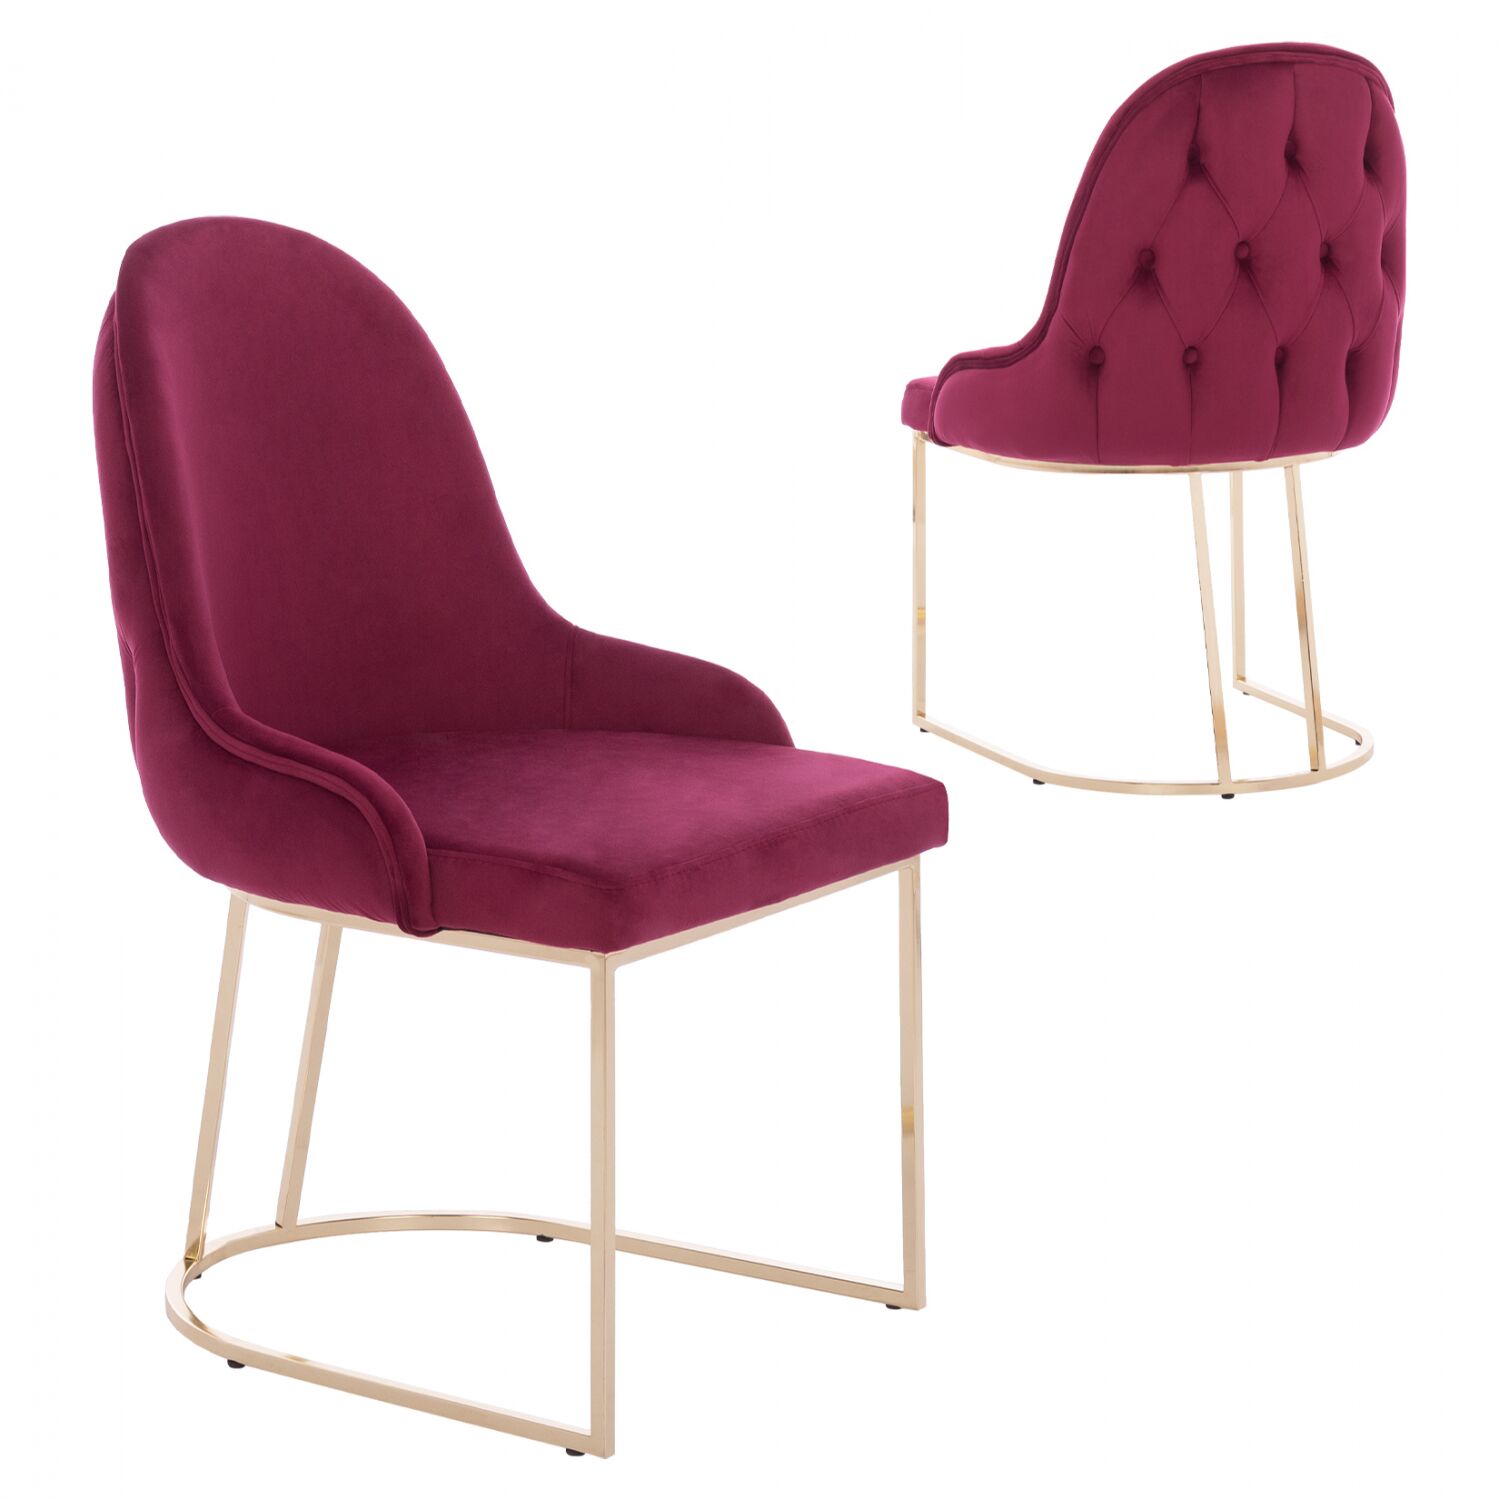 CHAIR “LILIANA” HM9277.06 BURGUNDY VELVET WITH METAL LEGS IN GOLD COLOR 55x64x90H CM.